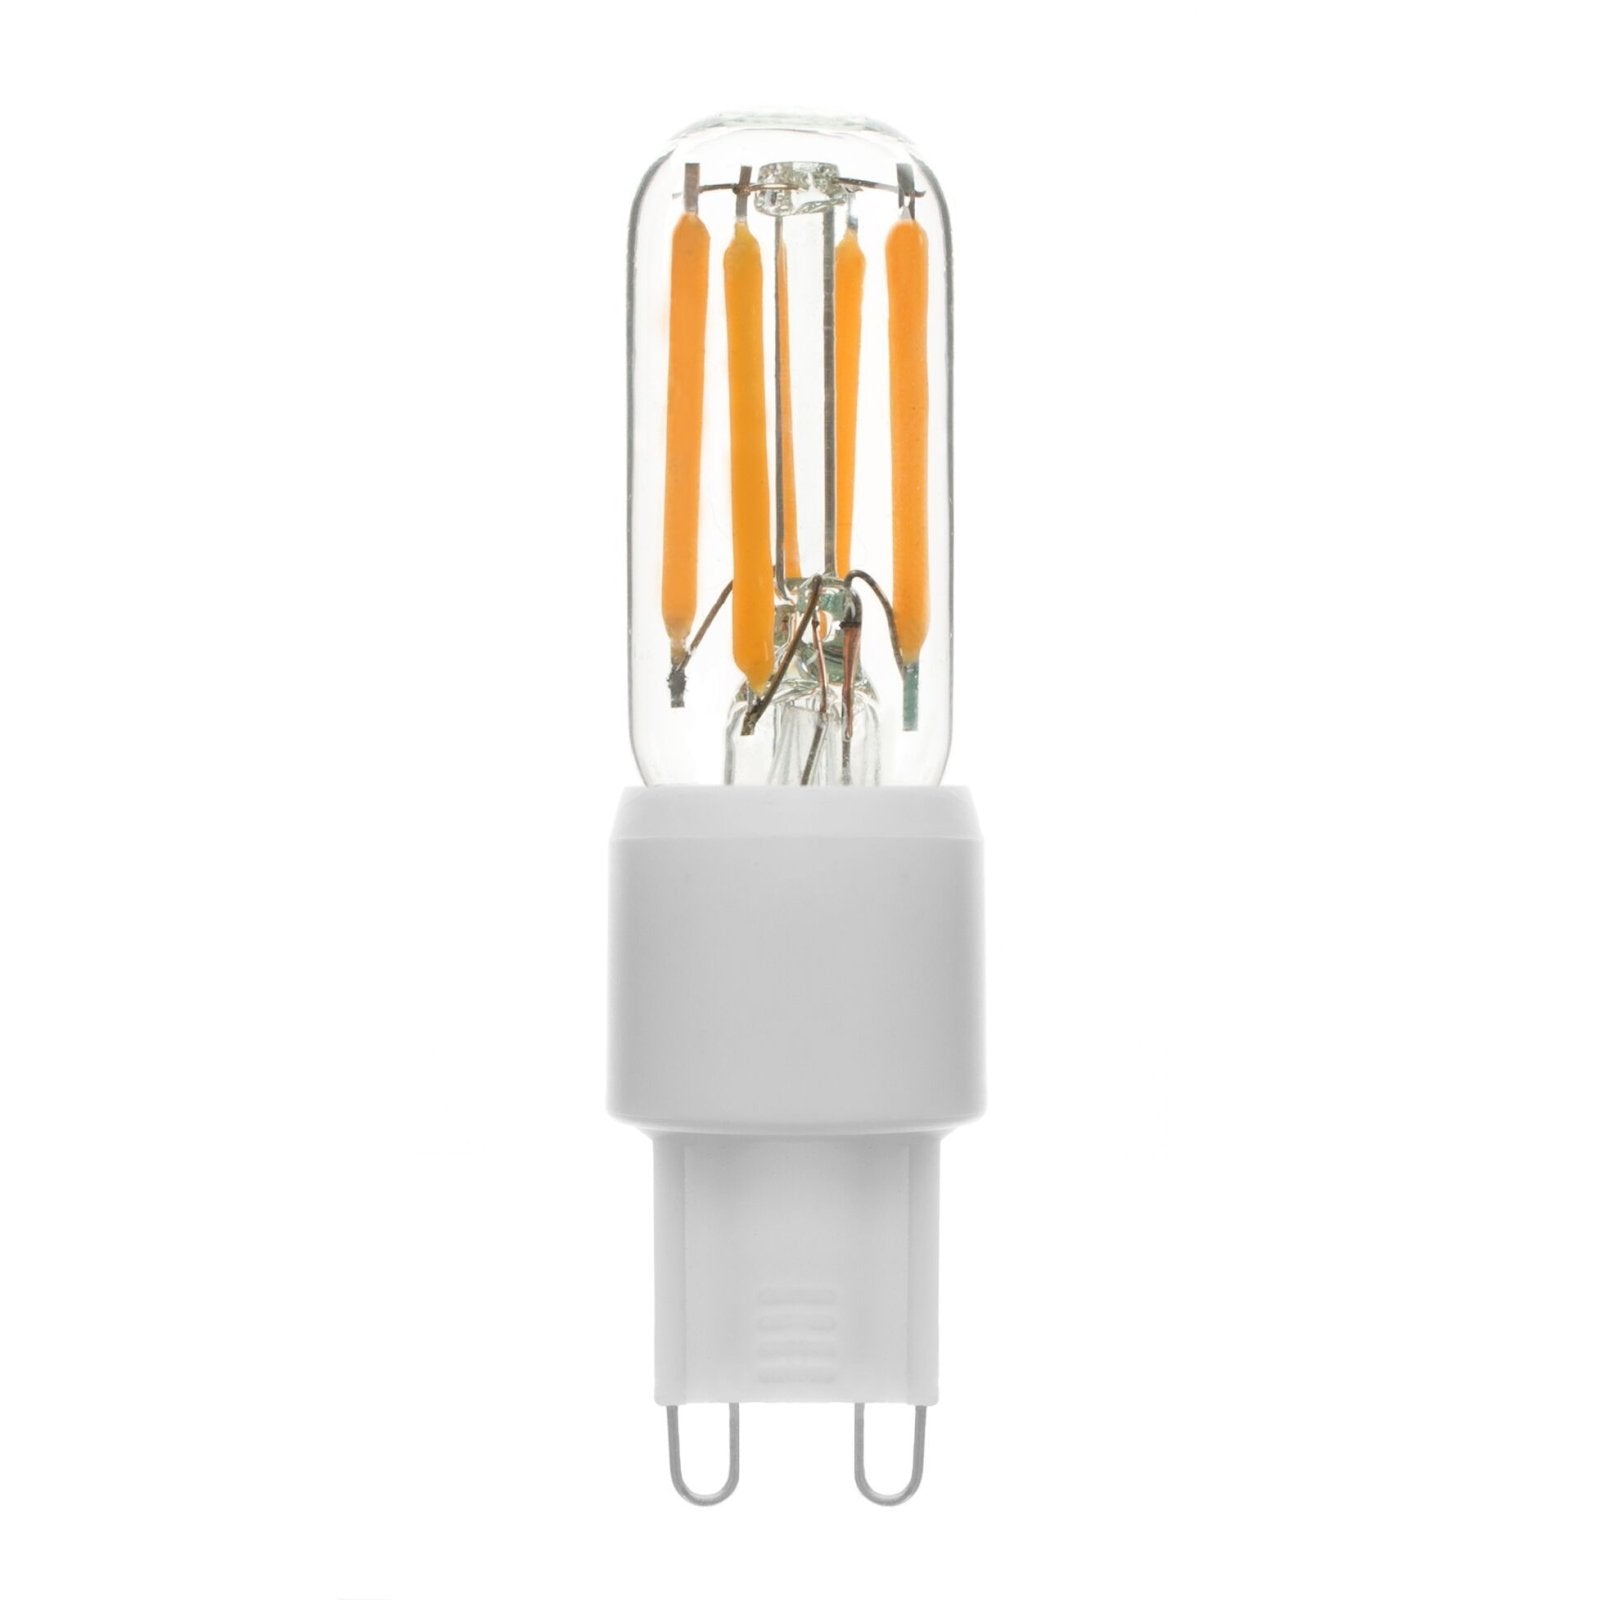 G9 Clear 3W 2700K - LED Lamp from RETROLIGHT. Made by Zico Lighting.